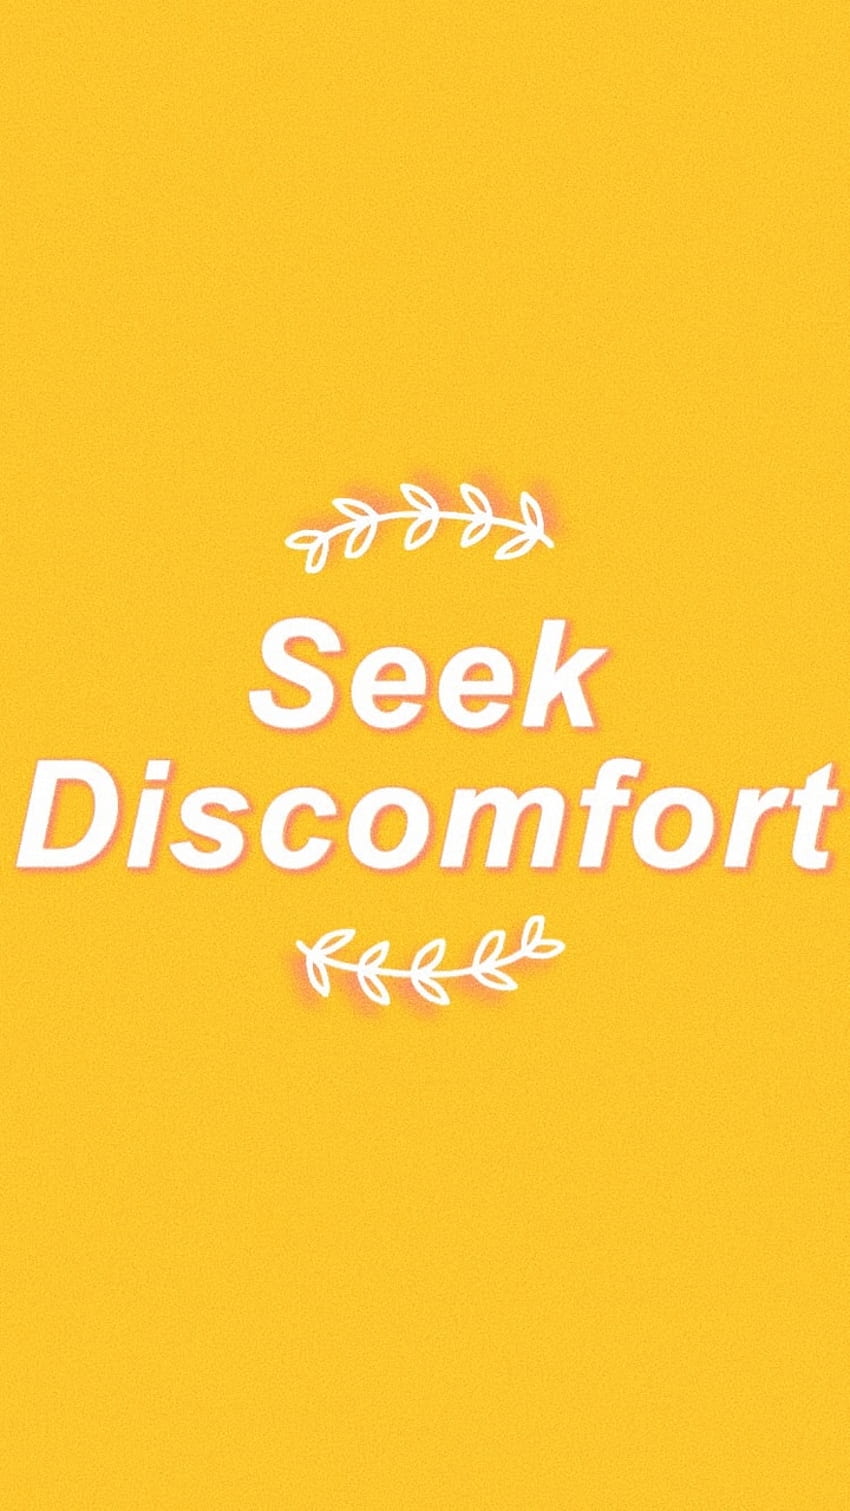 about life in for edits, Seek Discomfort HD phone wallpaper